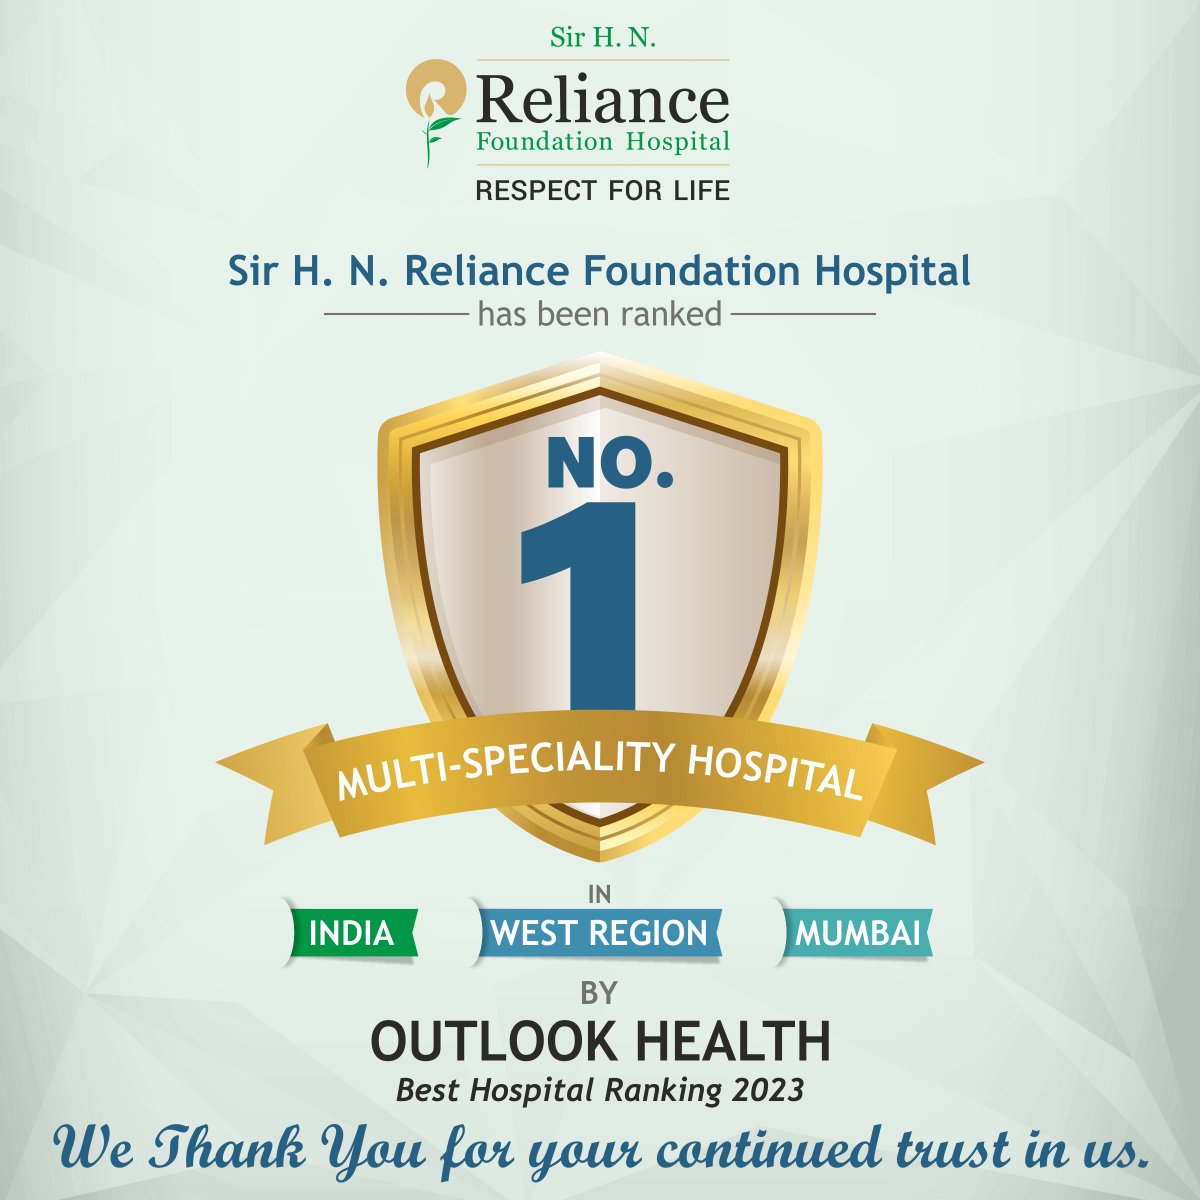 We are thrilled to announce that Sir H. N. Reliance Foundation Hospital has been awarded the prestigious title of the No.1 Multi-Specialty Hospital in India, West Region-Mumbai by Outlook Health! 🏆✨

#RelianceFoundationHospital #RespectForLife #BestMultiSpecialtyHospital